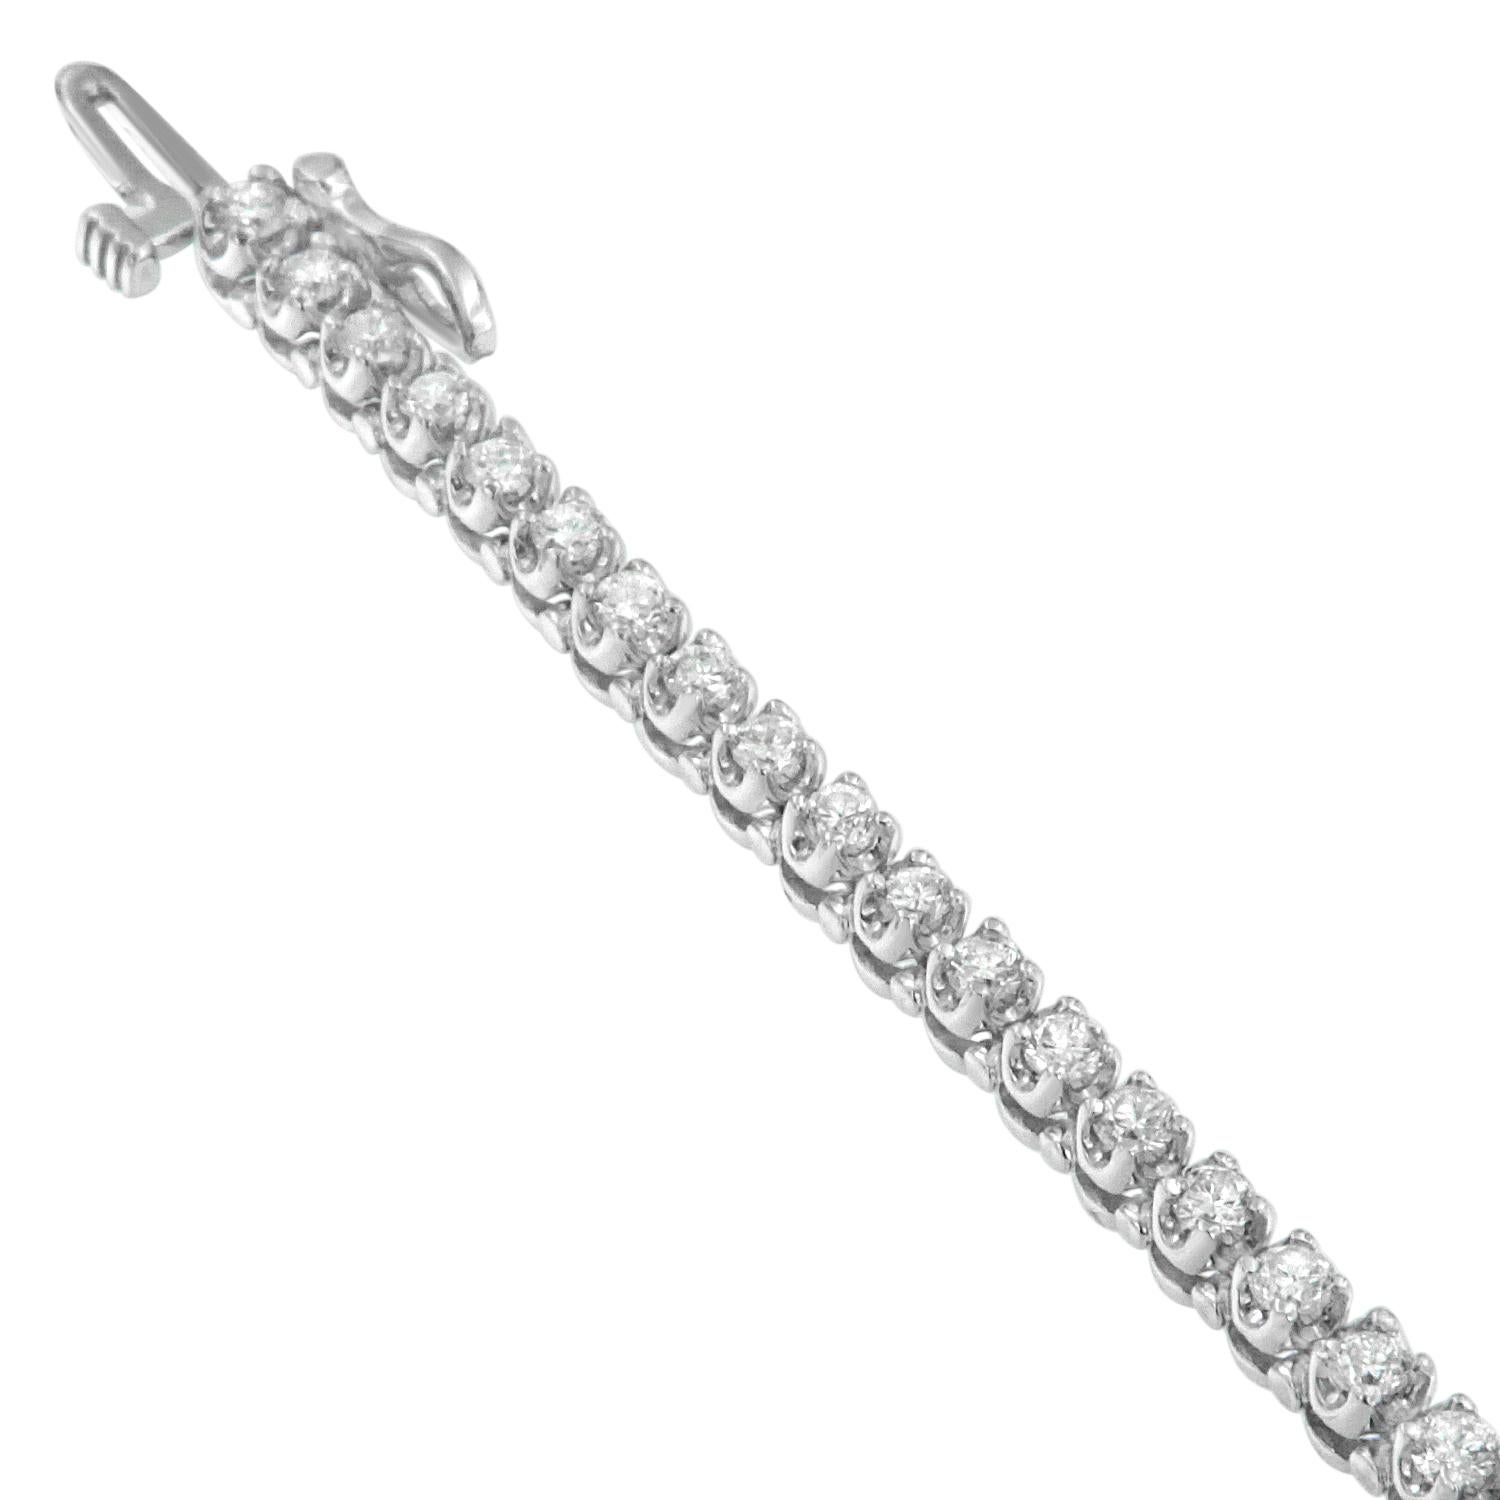 This 14K white gold bracelet features a symmetrical pattern of round cut diamonds lending it a stunning, shimmering effect. The flexibility and sleekness make it very attractive and wearable every day with any outfit. It is sure to make statements